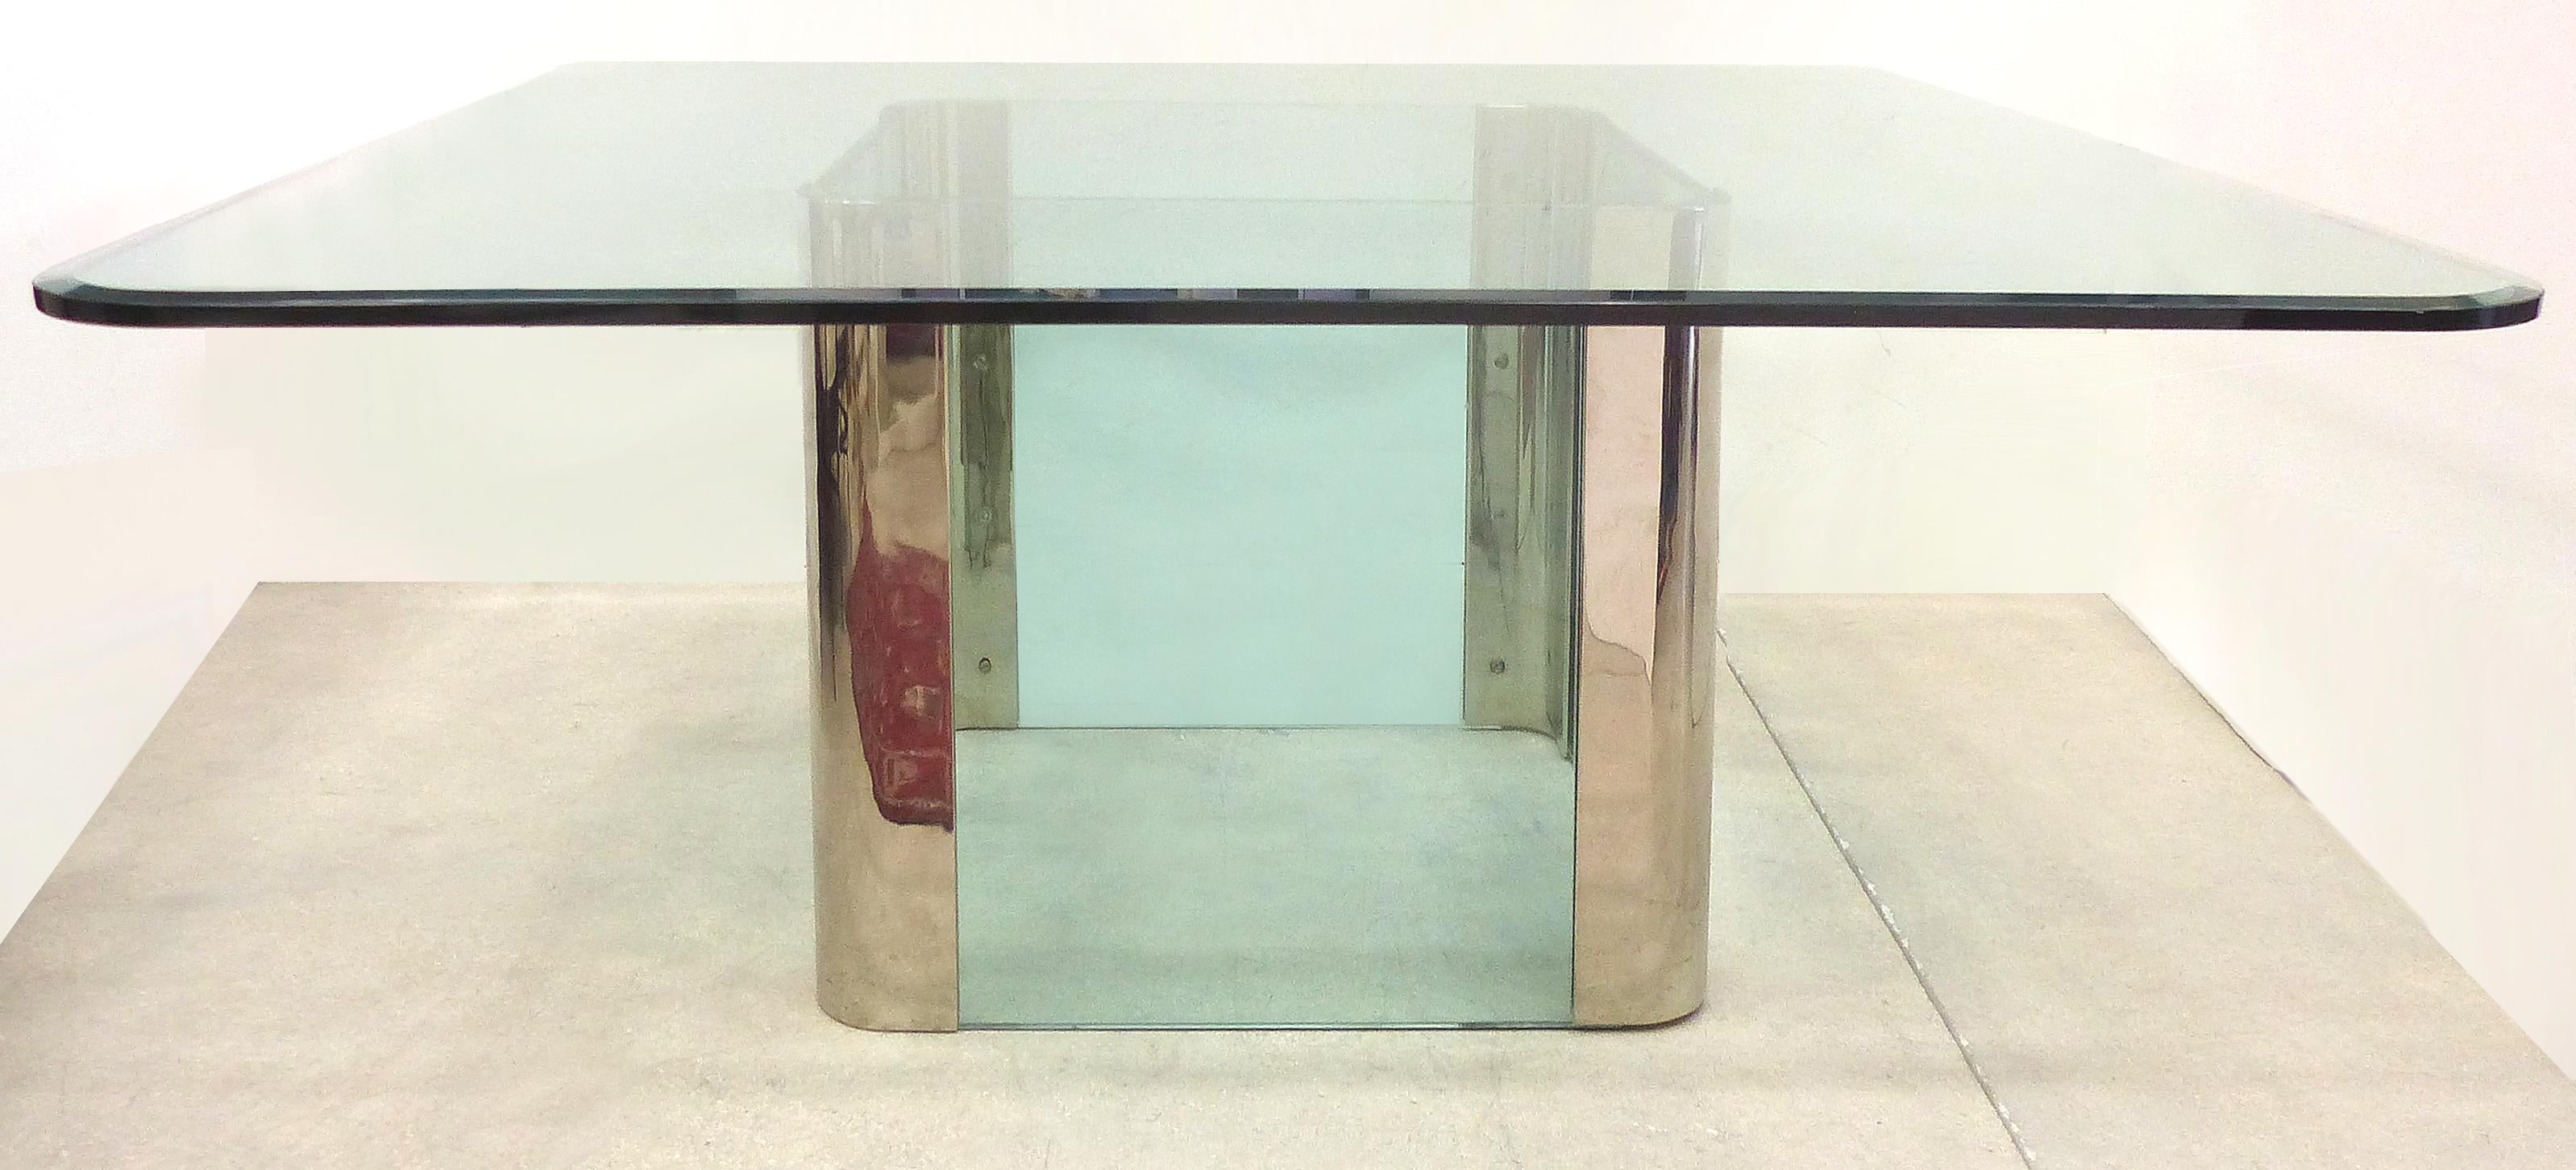 Leon Rosen Pace Collection Square Dining Table 

Offered for sale is a large square stainless steel and glass dining table designed by Leon Rosen for the Pace Collection. The glass is thick with rounded corners and a wide bevelled edge.